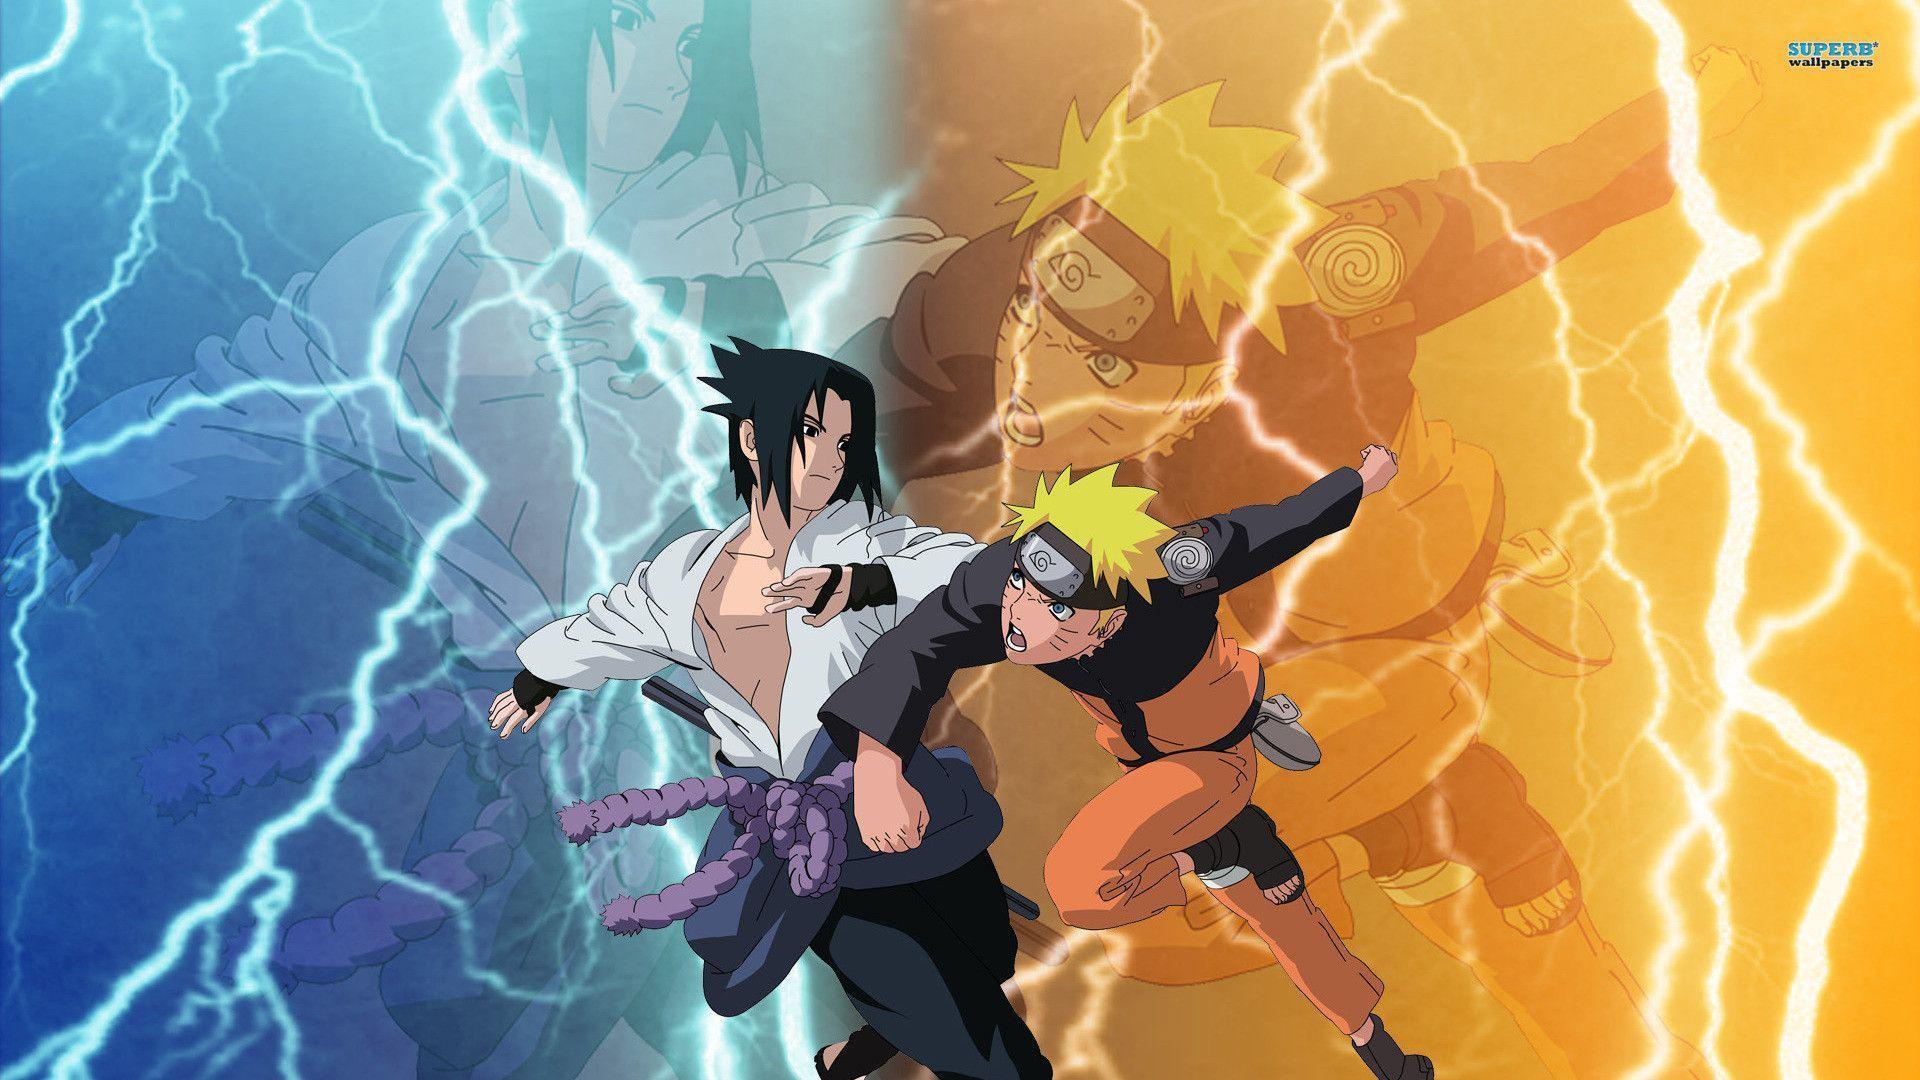 Naruto Shippuden Pictures And Wallpapers